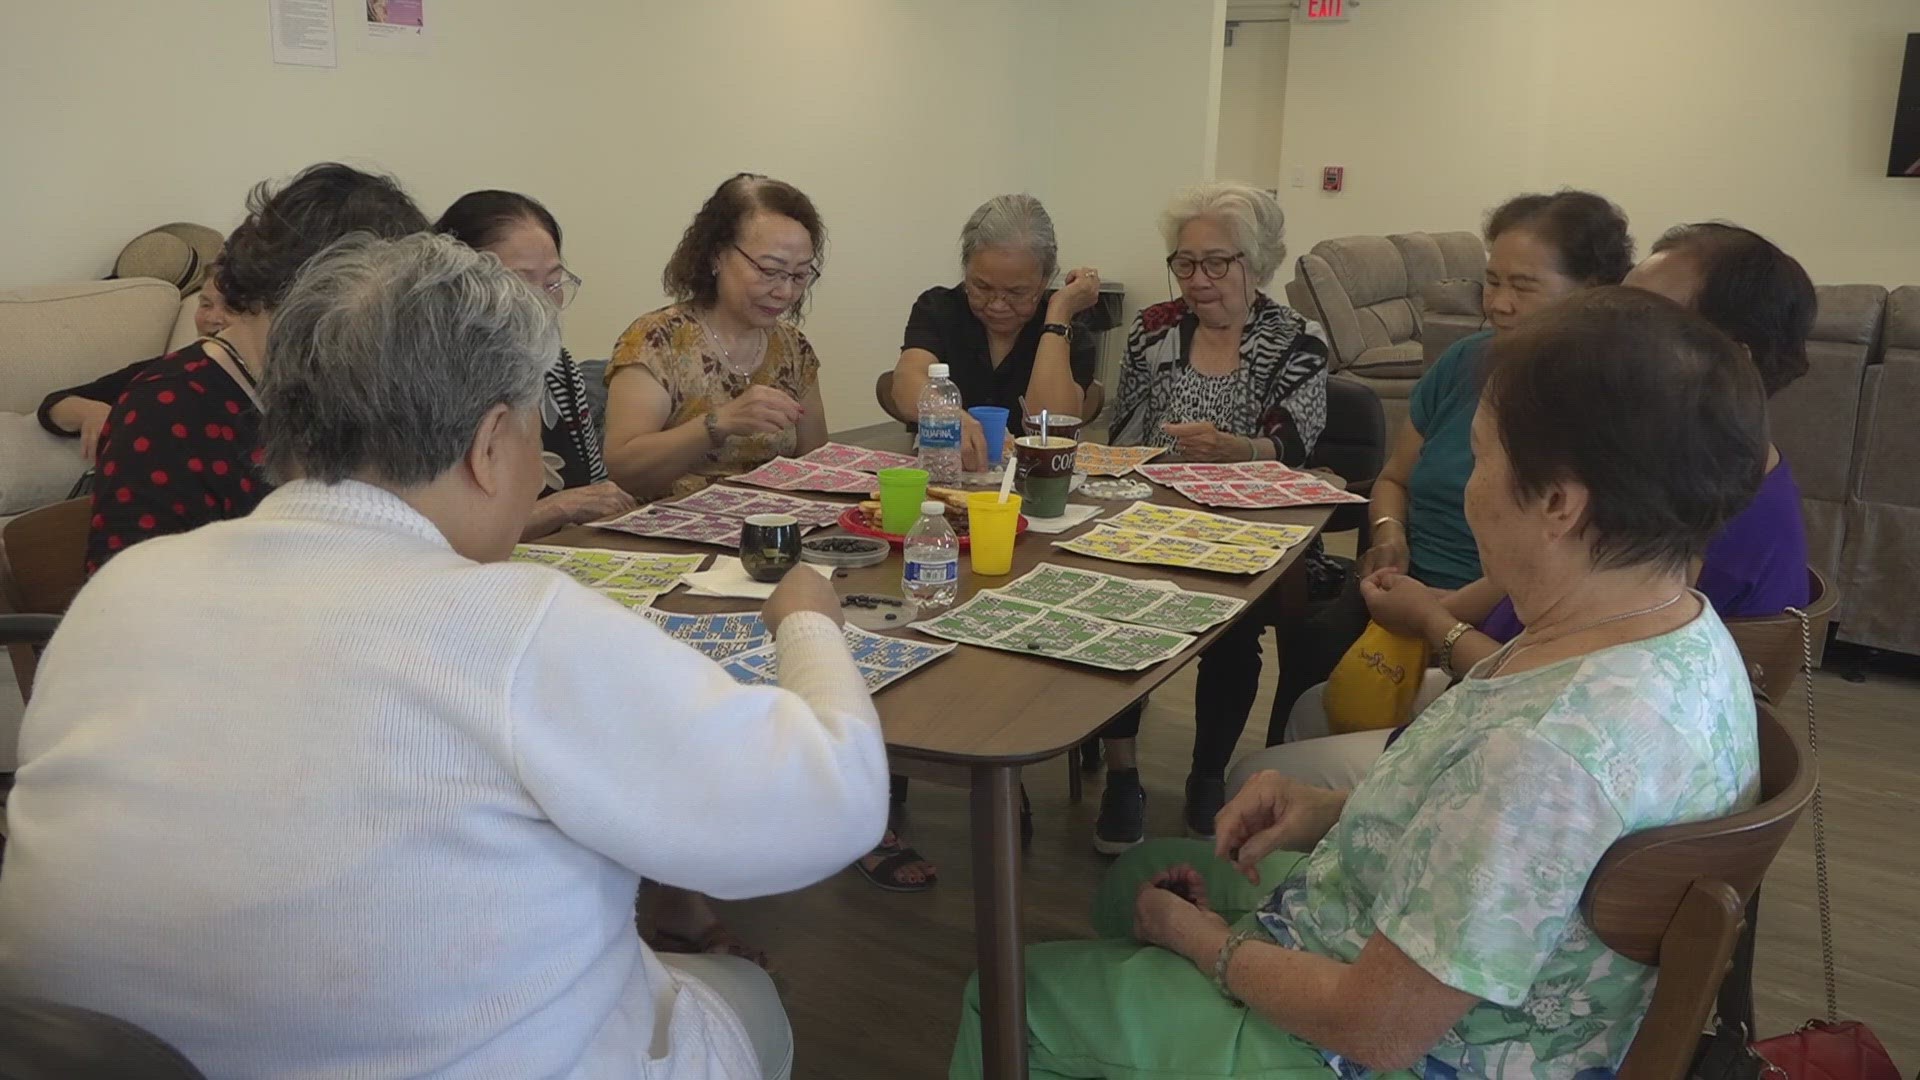 The center can accommodate up to 37 people per day, and their goal is to become a center that specializes in helping Asian-American elders.